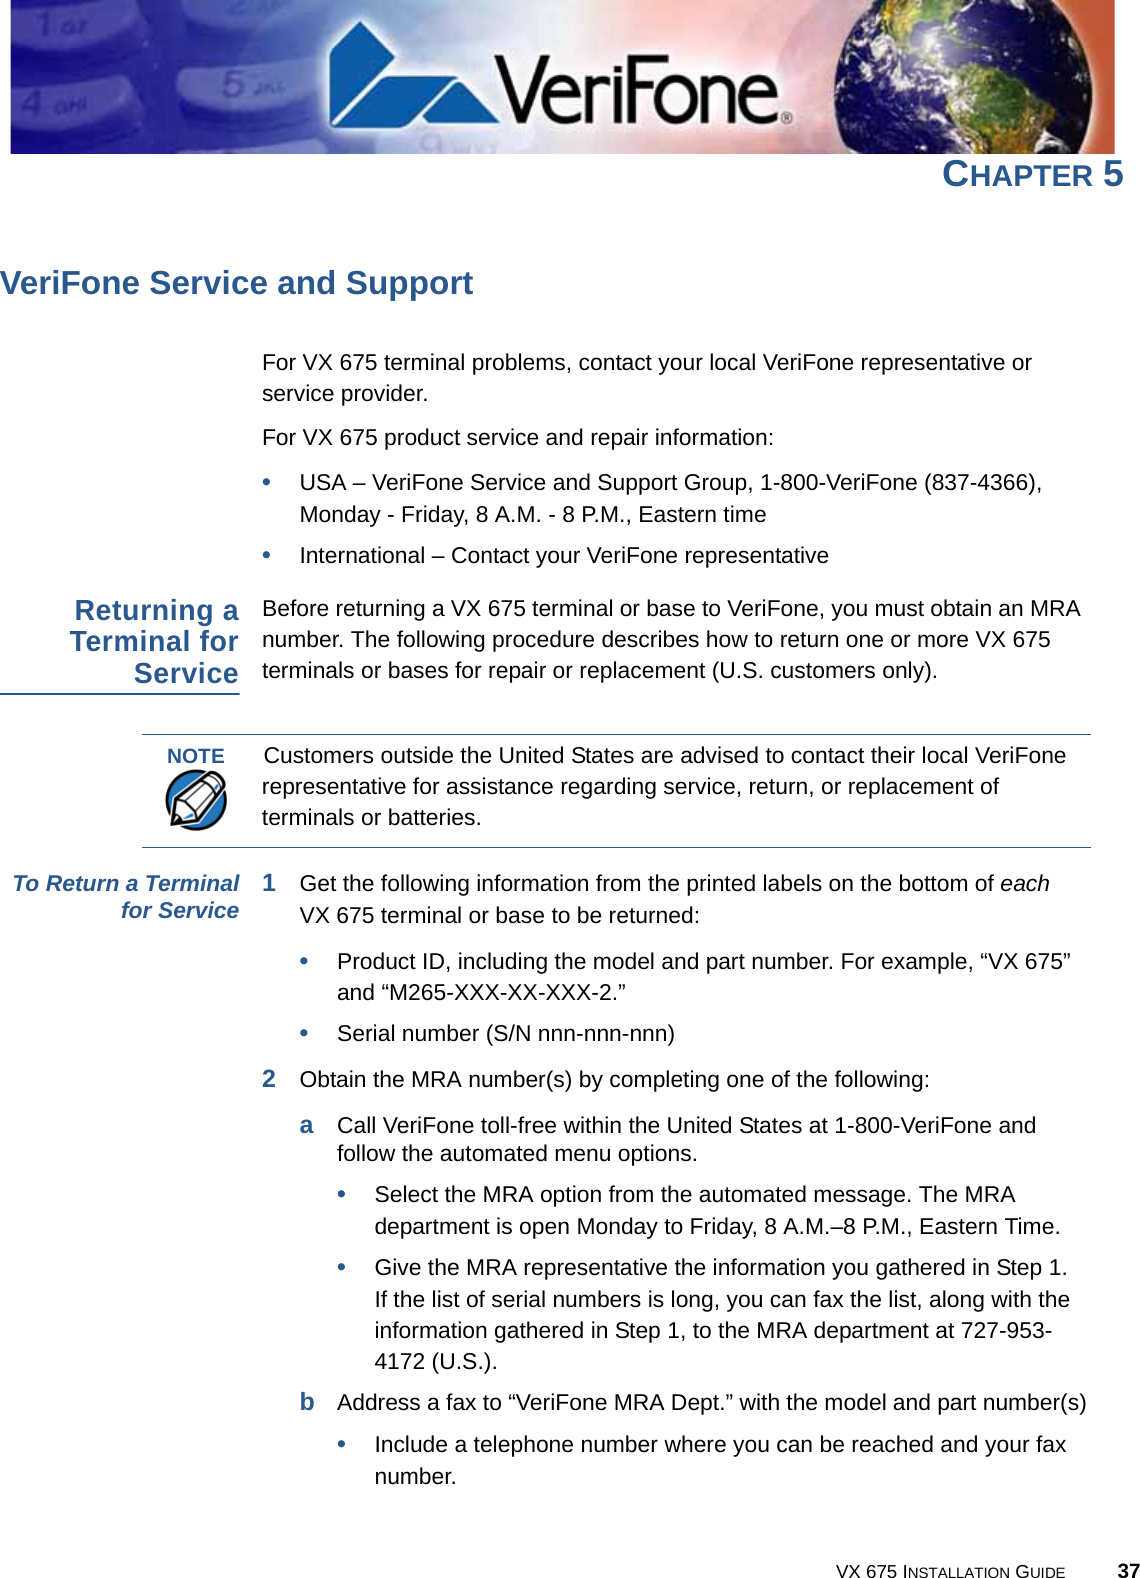 VX 675 INSTALLATION GUIDE 37CHAPTER 5VeriFone Service and SupportFor VX 675 terminal problems, contact your local VeriFone representative or service provider. For VX 675 product service and repair information:•USA – VeriFone Service and Support Group, 1-800-VeriFone (837-4366), Monday - Friday, 8 A.M. - 8 P.M., Eastern time•International – Contact your VeriFone representative Returning aTerminal forServiceBefore returning a VX 675 terminal or base to VeriFone, you must obtain an MRA number. The following procedure describes how to return one or more VX 675 terminals or bases for repair or replacement (U.S. customers only). To Return a Terminalfor Service 1Get the following information from the printed labels on the bottom of each VX 675 terminal or base to be returned:•Product ID, including the model and part number. For example, “VX 675” and “M265-XXX-XX-XXX-2.”•Serial number (S/N nnn-nnn-nnn)2Obtain the MRA number(s) by completing one of the following:aCall VeriFone toll-free within the United States at 1-800-VeriFone and follow the automated menu options.•Select the MRA option from the automated message. The MRA department is open Monday to Friday, 8 A.M.–8 P.M., Eastern Time.•Give the MRA representative the information you gathered in Step 1.If the list of serial numbers is long, you can fax the list, along with the information gathered in Step 1, to the MRA department at 727-953-4172 (U.S.).bAddress a fax to “VeriFone MRA Dept.” with the model and part number(s)•Include a telephone number where you can be reached and your fax number.NOTECustomers outside the United States are advised to contact their local VeriFone representative for assistance regarding service, return, or replacement of terminals or batteries.